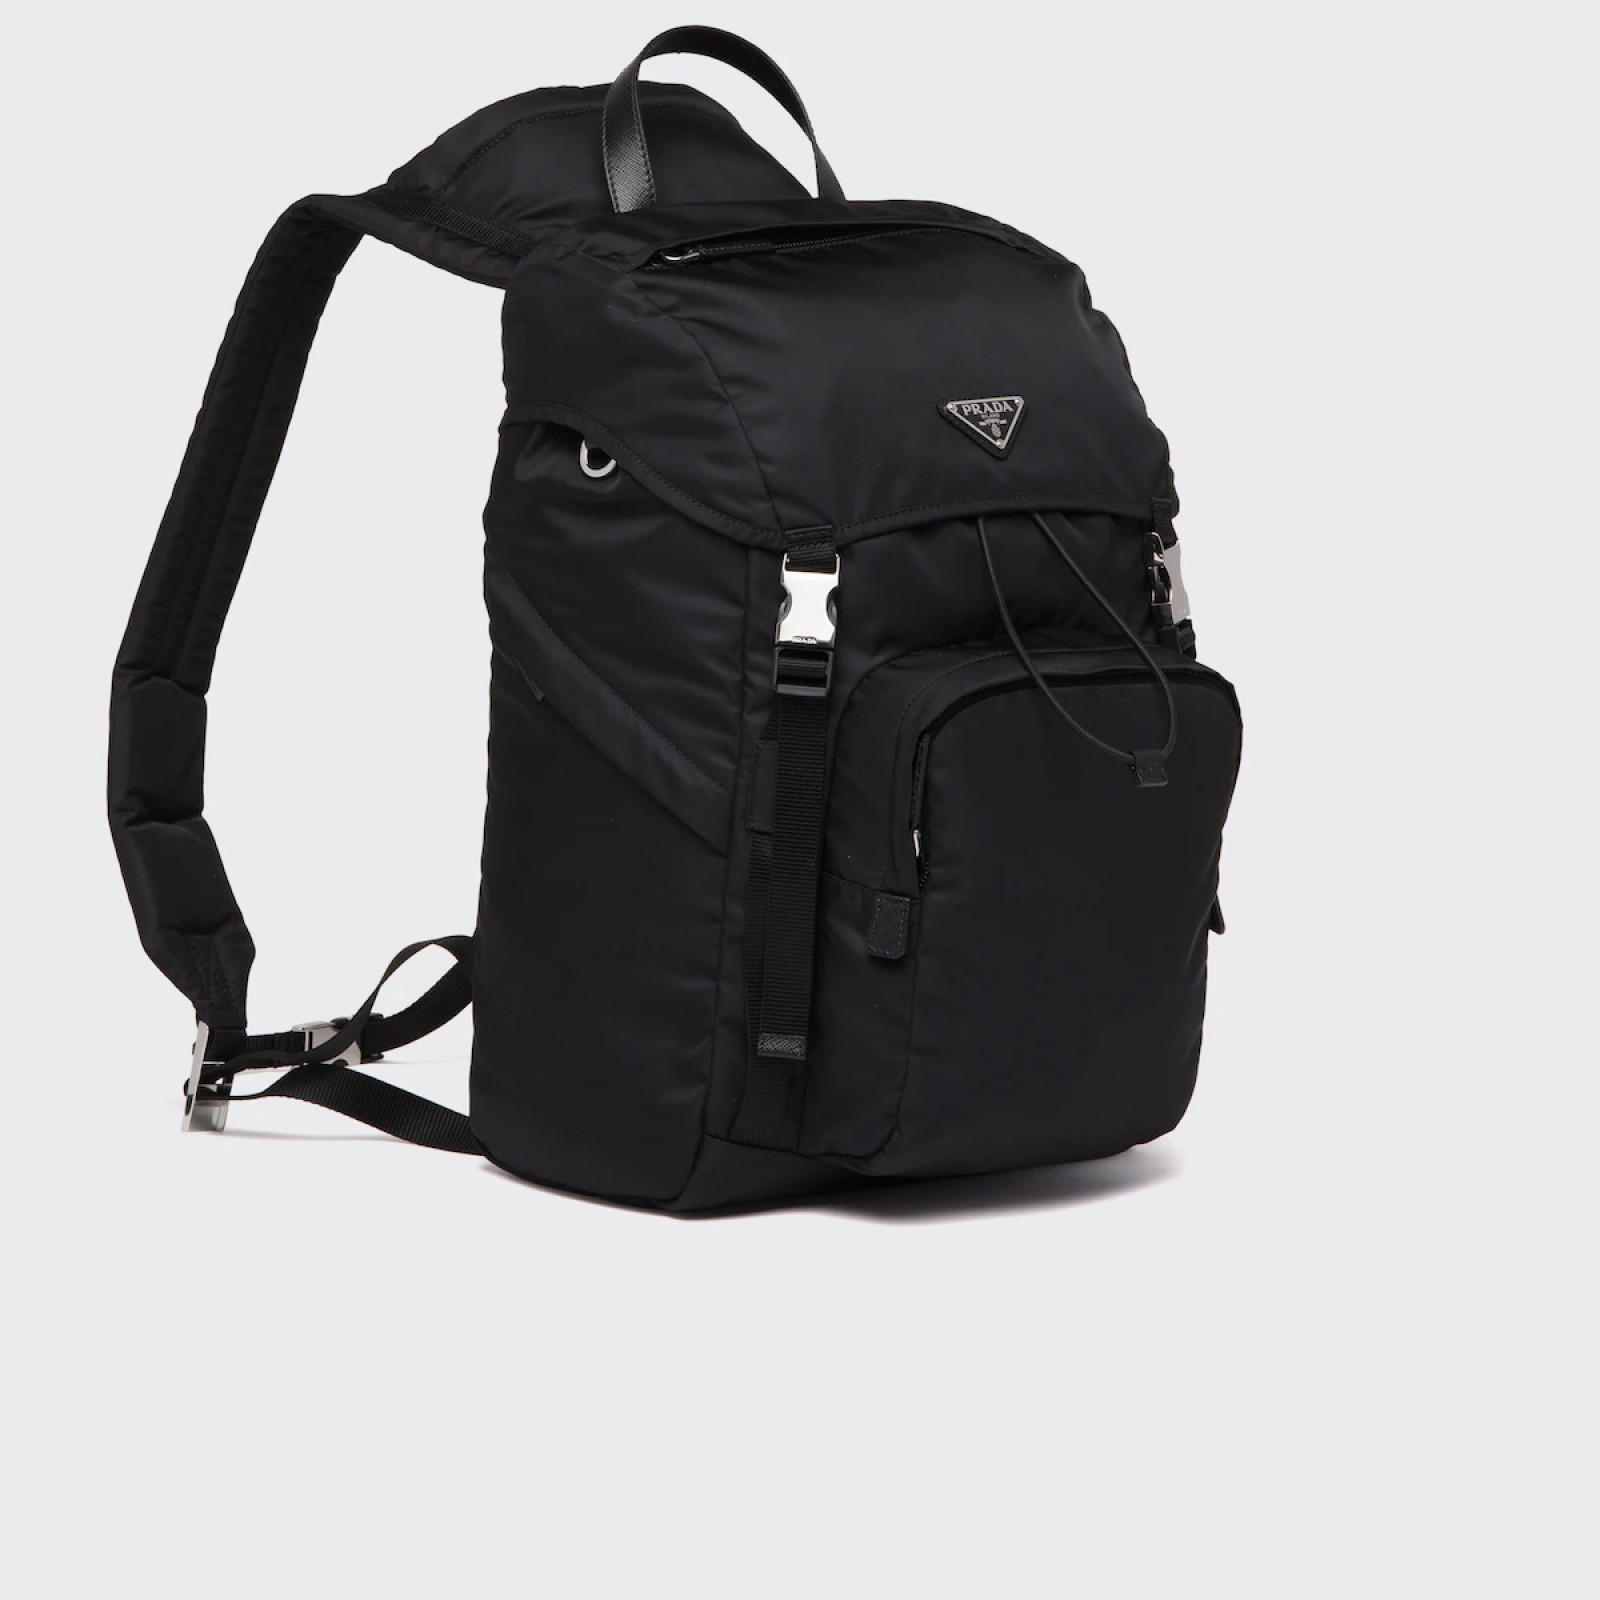 Re-Nylon and Saffiano leather backpack with hood